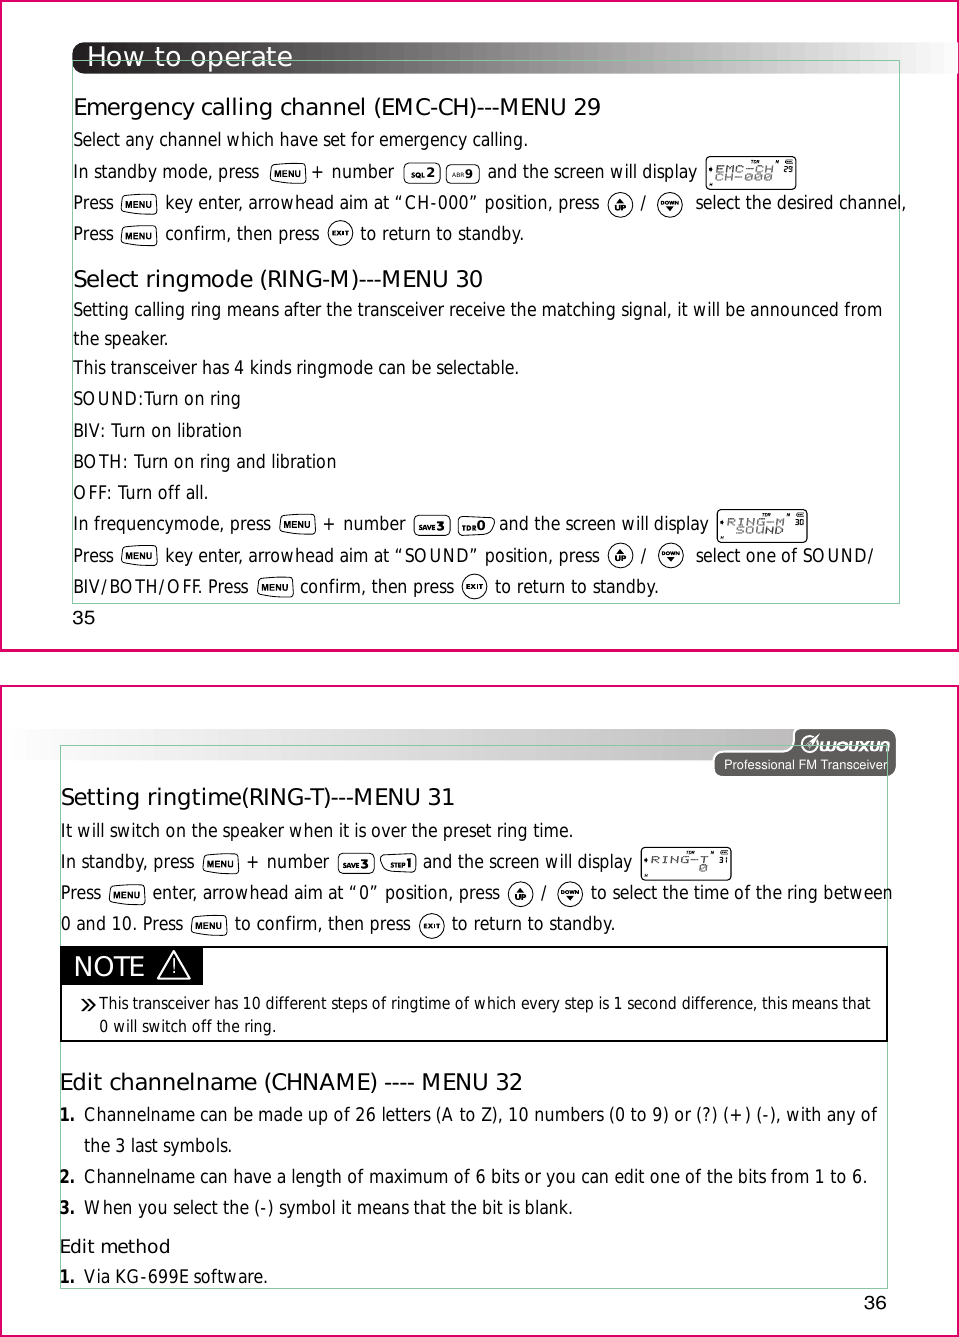 How to operate35Professional FM Transceiver36Edit channelname (CHNAME) ---- MENU 321.2.3.Channelname can be made up of 26 letters (A to Z), 10 numbers (0 to 9) or (?) (+) (-), with any ofthe 3 last symbols.Channelname can have a length of maximum of 6 bits or you can edit one of the bits from 1 to 6.When you select the (-) symbol it means that the bit is blank.Edit method1. Via KG-699E software.Setting ringtime(RING-T)---MENU 31It will switch on the speaker when it is over the preset ring time.In standby, press          + number                  and the screen will displayPress          enter, arrowhead aim at “0” position, press        /        to select the time of the ring between0 and 10. Press          to confirm, then press        to return to standby.Emergency calling channel (EMC-CH)---MENU 29Select any channel which have set for emergency calling.In standby mode, press          + number                  and the screen will displayPress          key enter, arrowhead aim at “CH-000” position, press        /         select the desired channel,Press          confirm, then press        to return to standby.29ABRSelect ringmode (RING-M)---MENU 30Setting calling ring means after the transceiver receive the matching signal, it will be announced fromthe speaker.This transceiver has 4 kinds ringmode can be selectable.SOUND:Turn on ringBIV: Turn on librationBOTH: Turn on ring and librationOFF: Turn off all.In frequencymode, press          + number                  and the screen will displayPress          key enter, arrowhead aim at “SOUND” position, press        /         select one of SOUND/BIV/BOTH/OFF. Press          confirm, then press        to return to standby.0NOTE !This transceiver has 10 different steps of ringtime of which every step is 1 second difference, this means that 0 will switch off the ring.